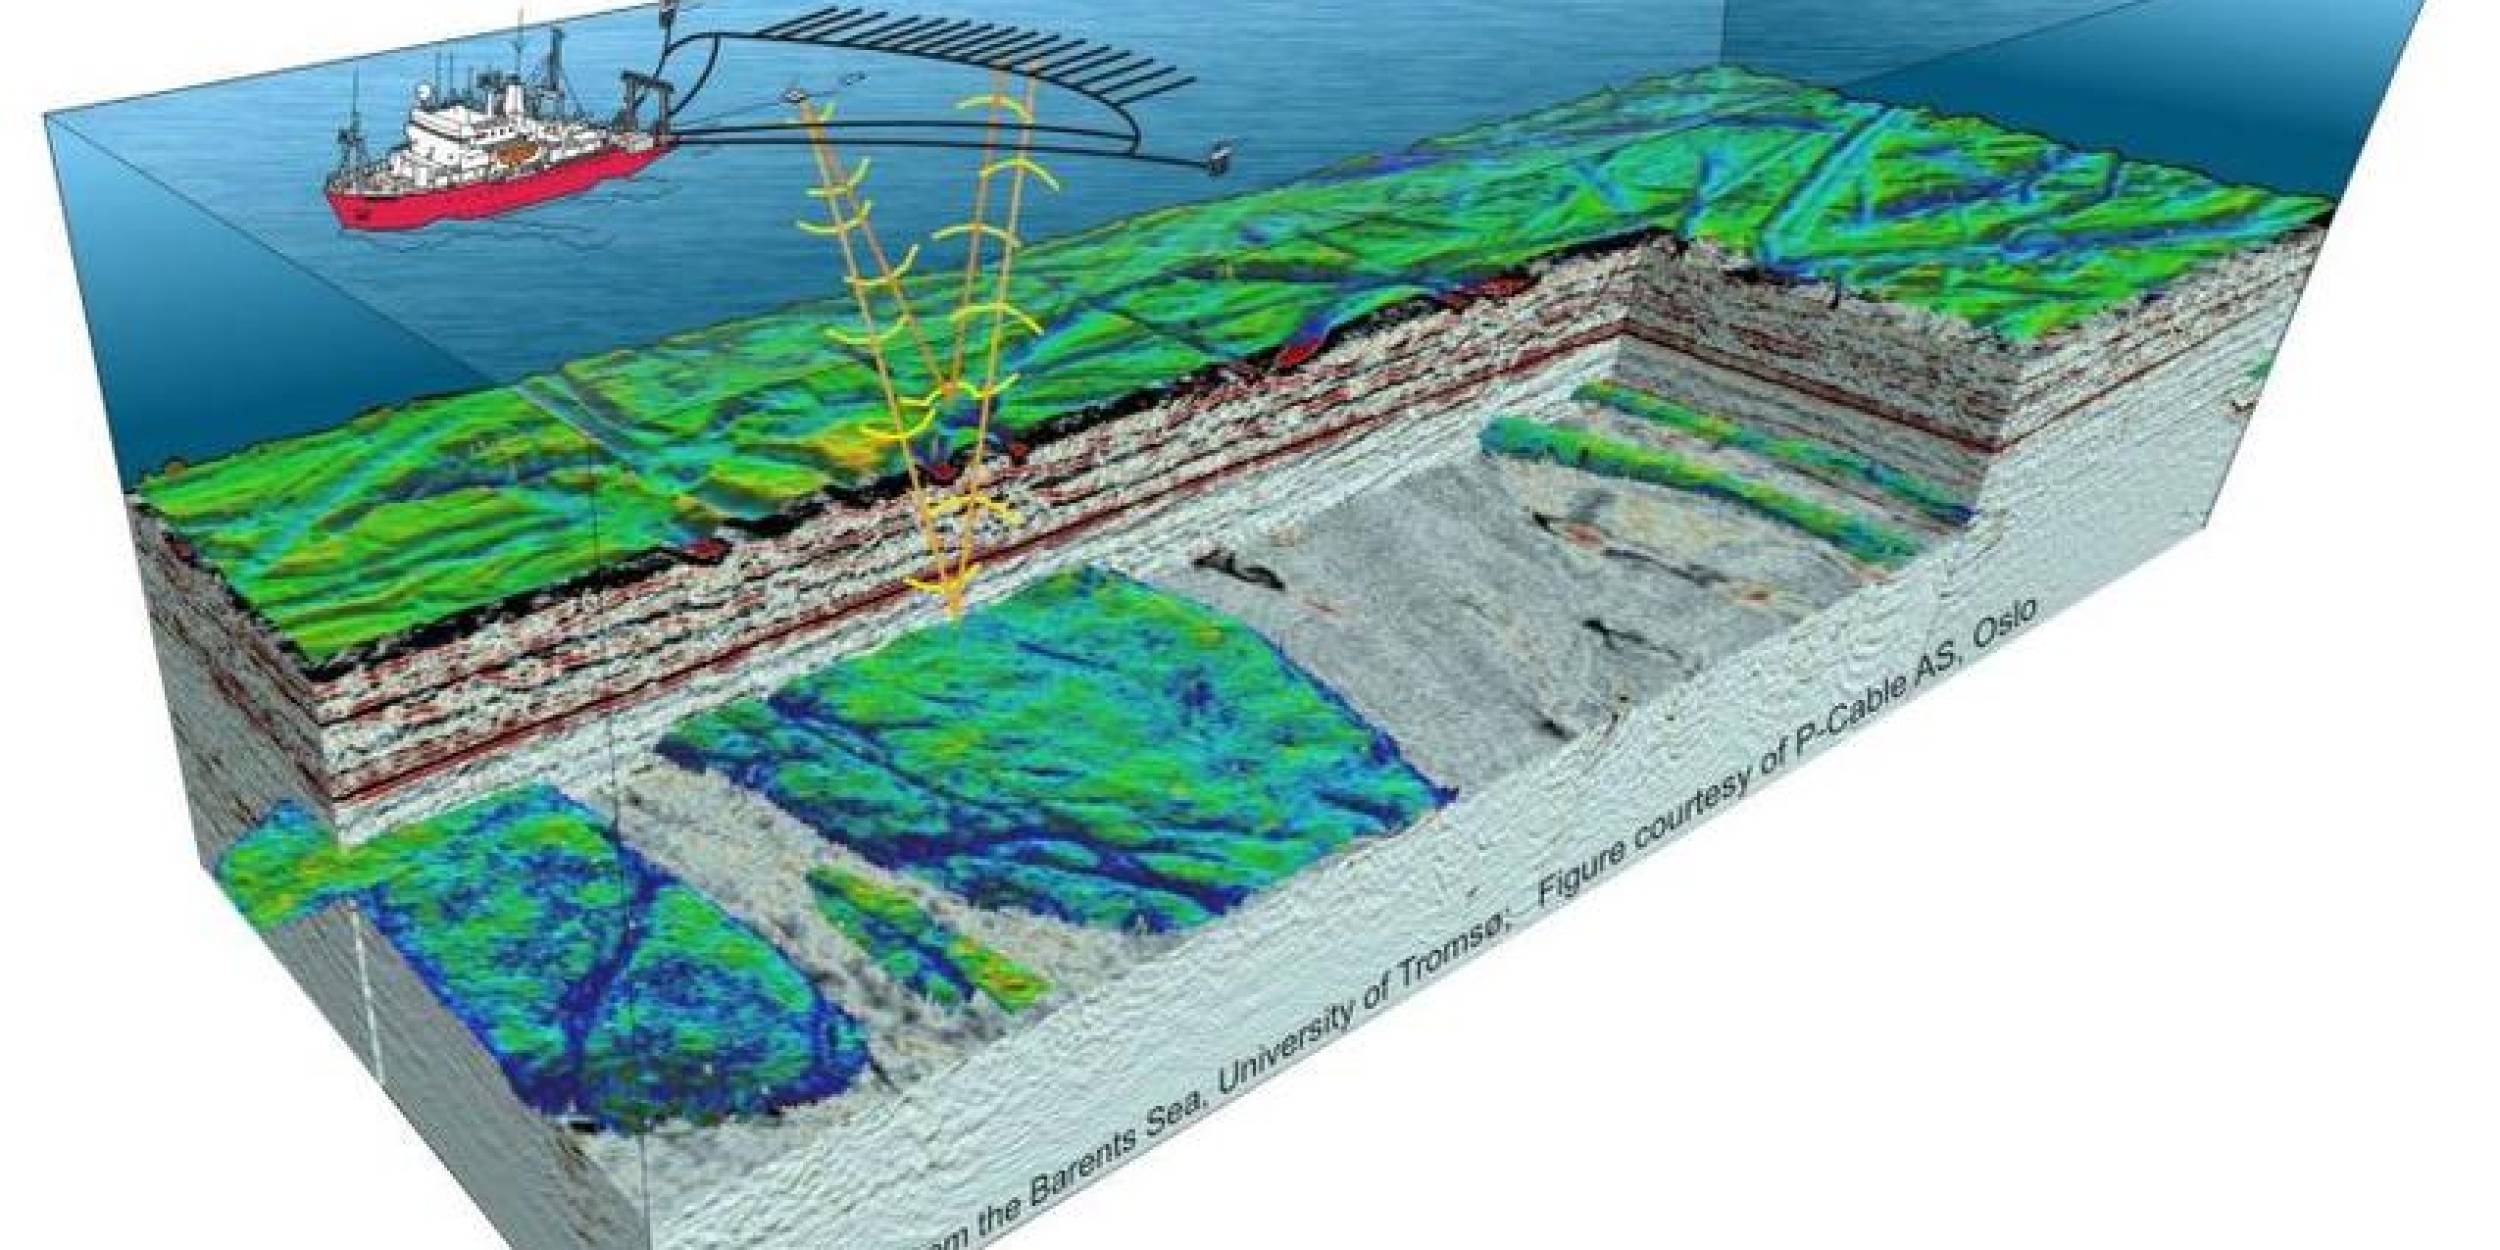 Handling complex geological environments